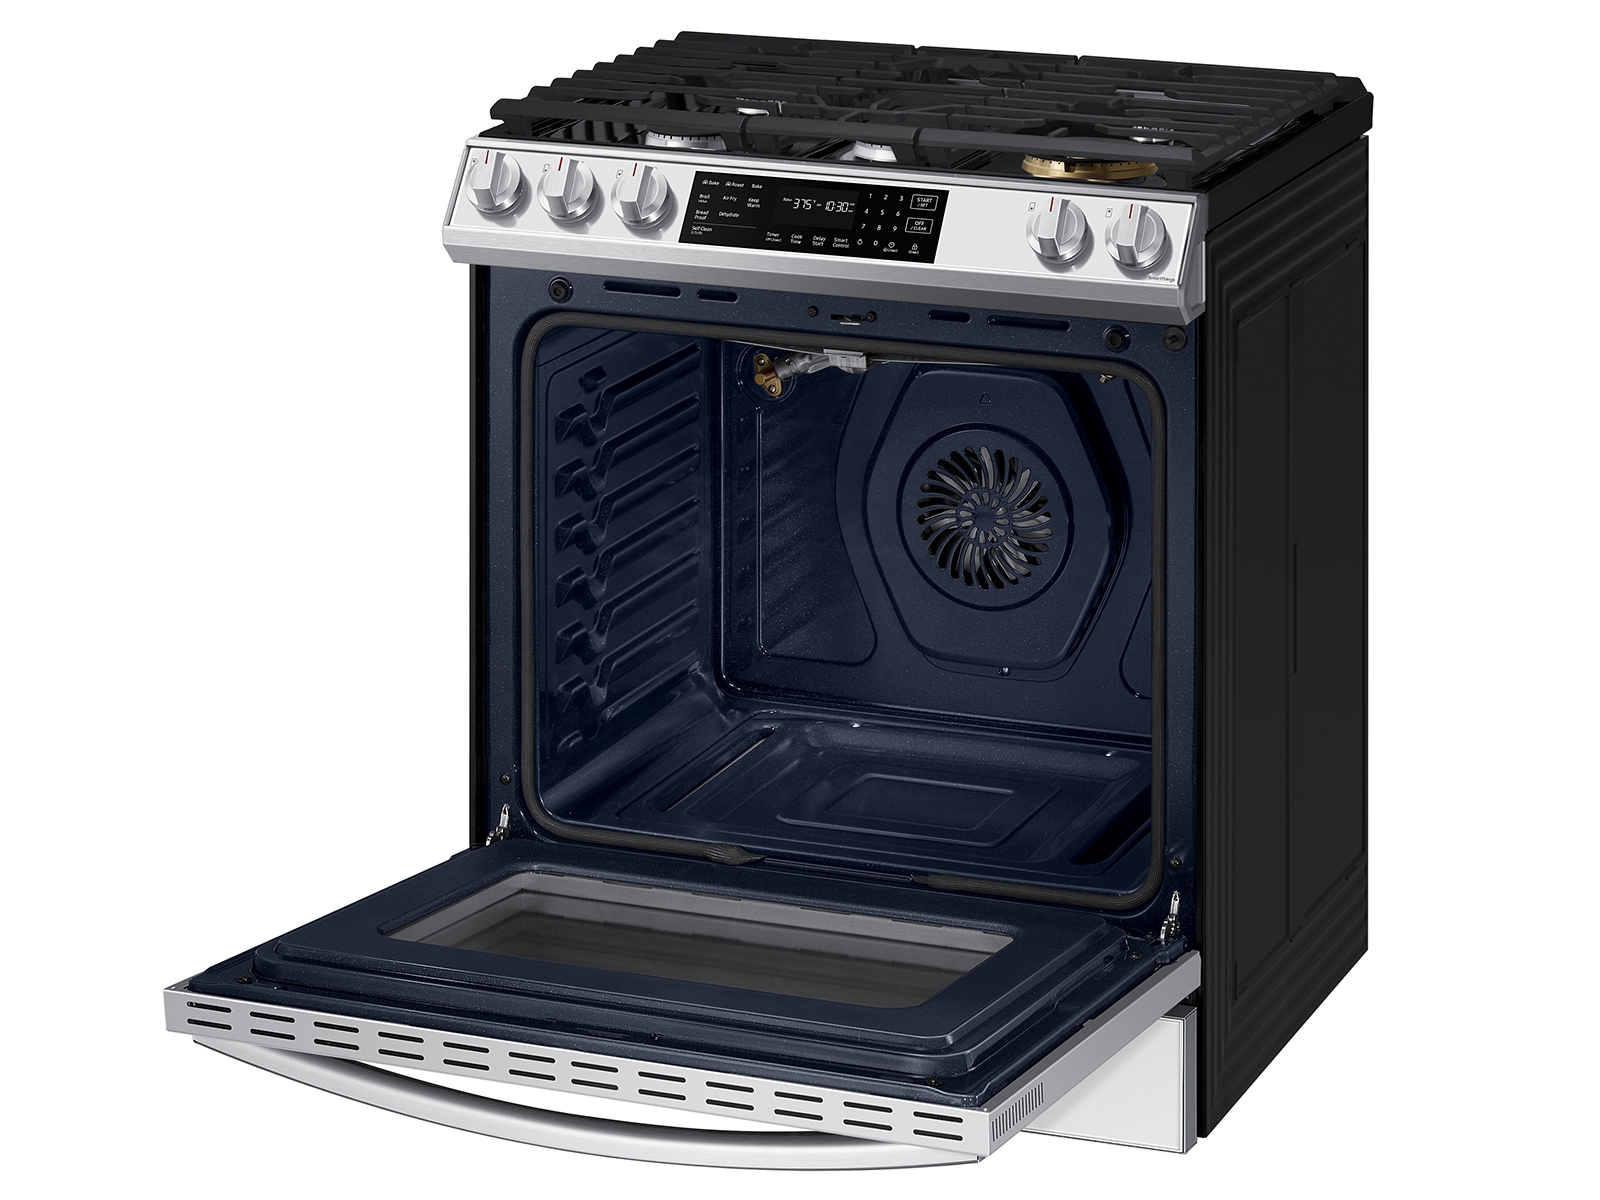 Thumbnail image of Bespoke 6.0 cu. ft. Smart Front Control Slide-In Gas Range with Air Fry & Wi-Fi in White Glass